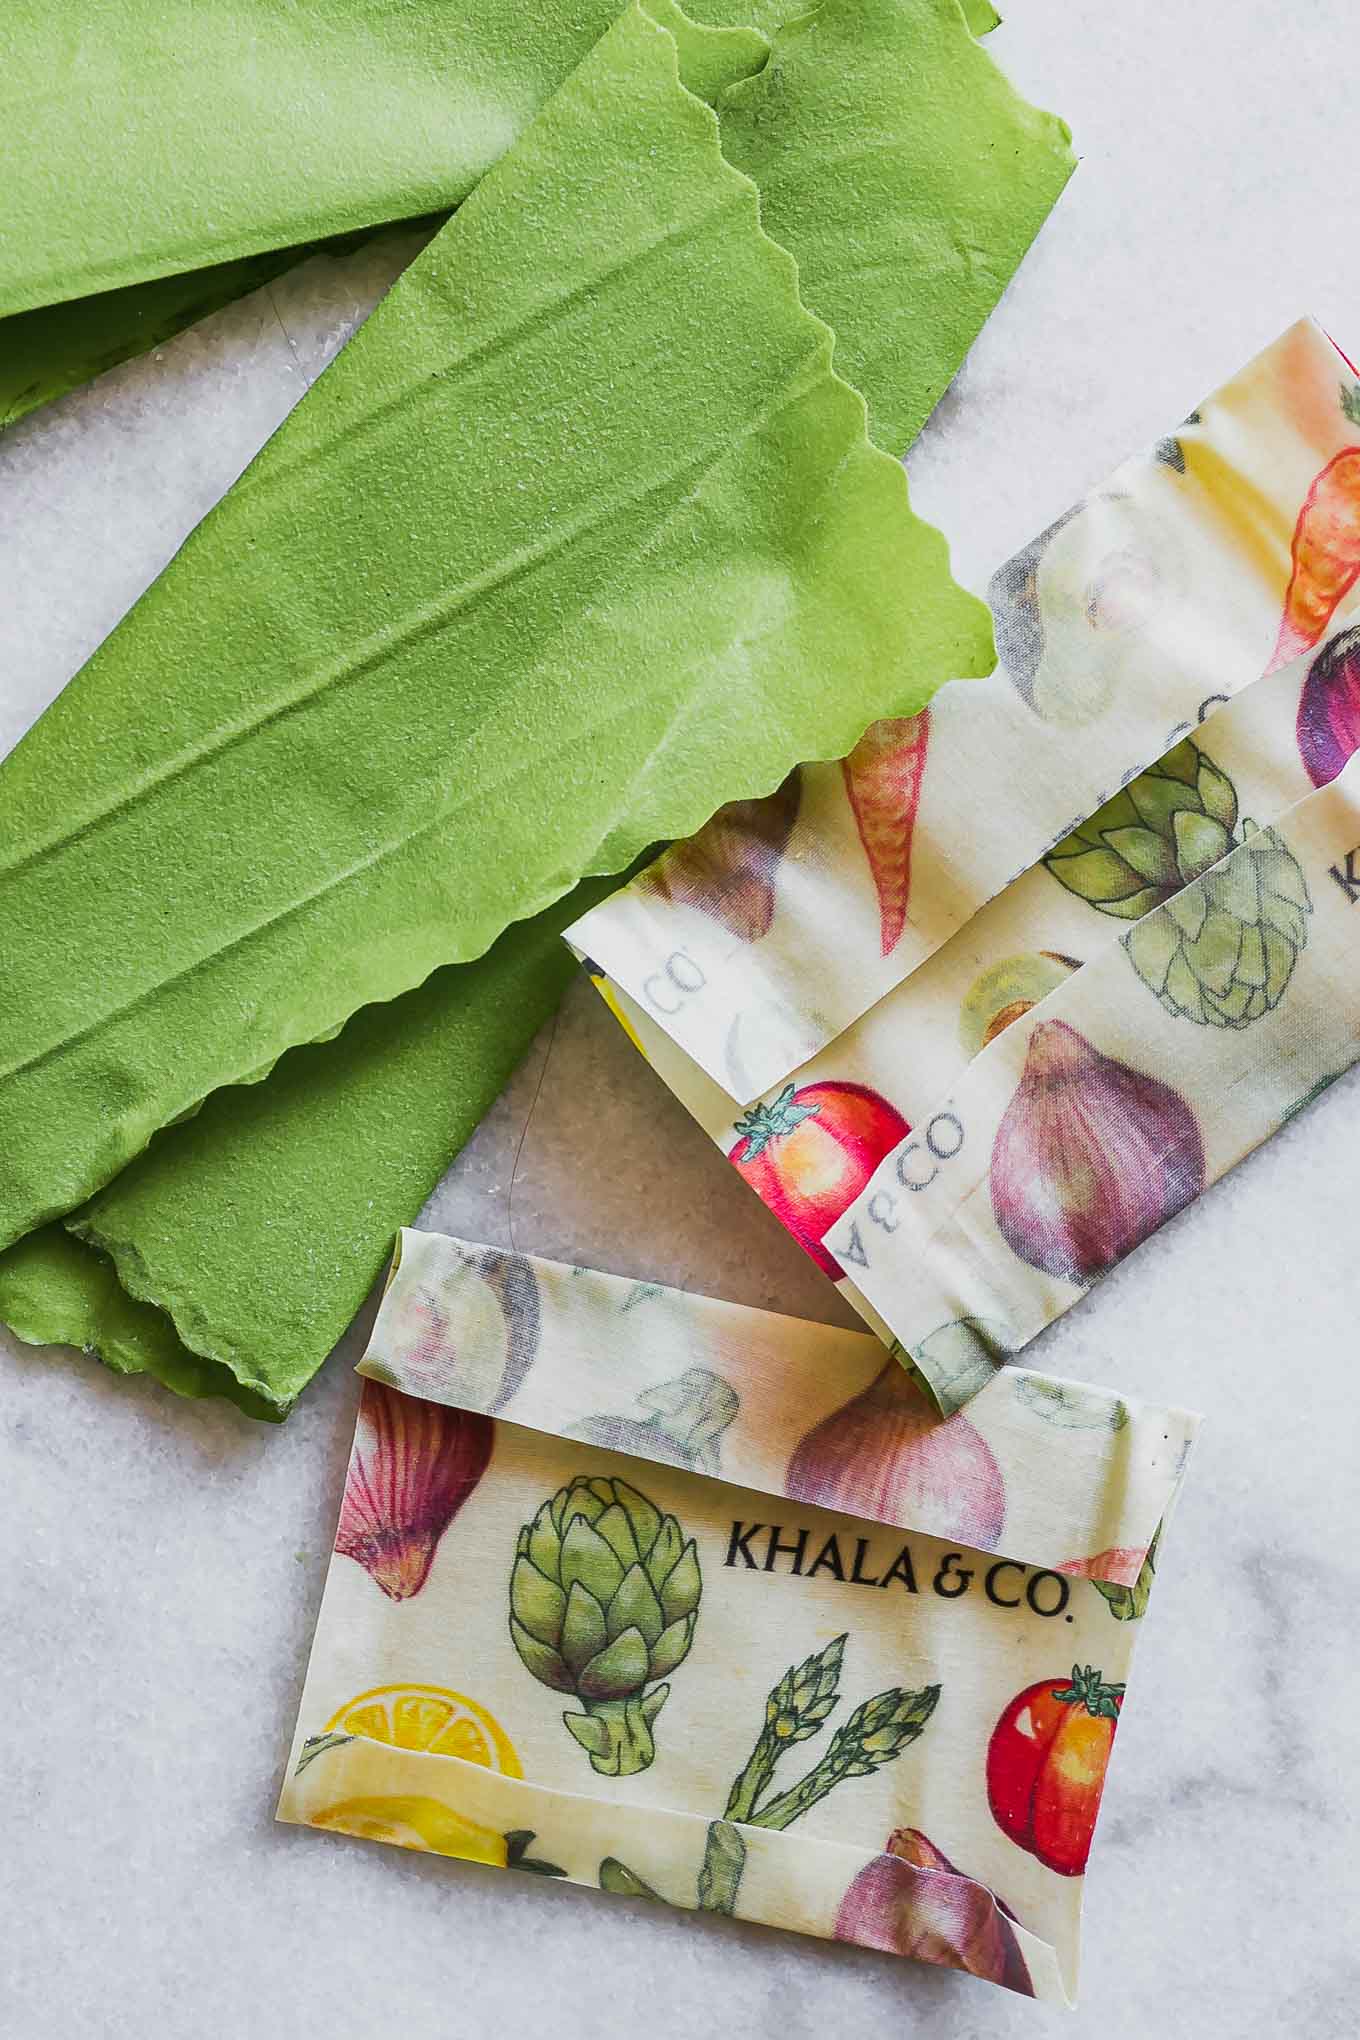 https://www.forkintheroad.co/wp-content/uploads/2022/02/beeswax-wrap-eco-friendly-111.jpg